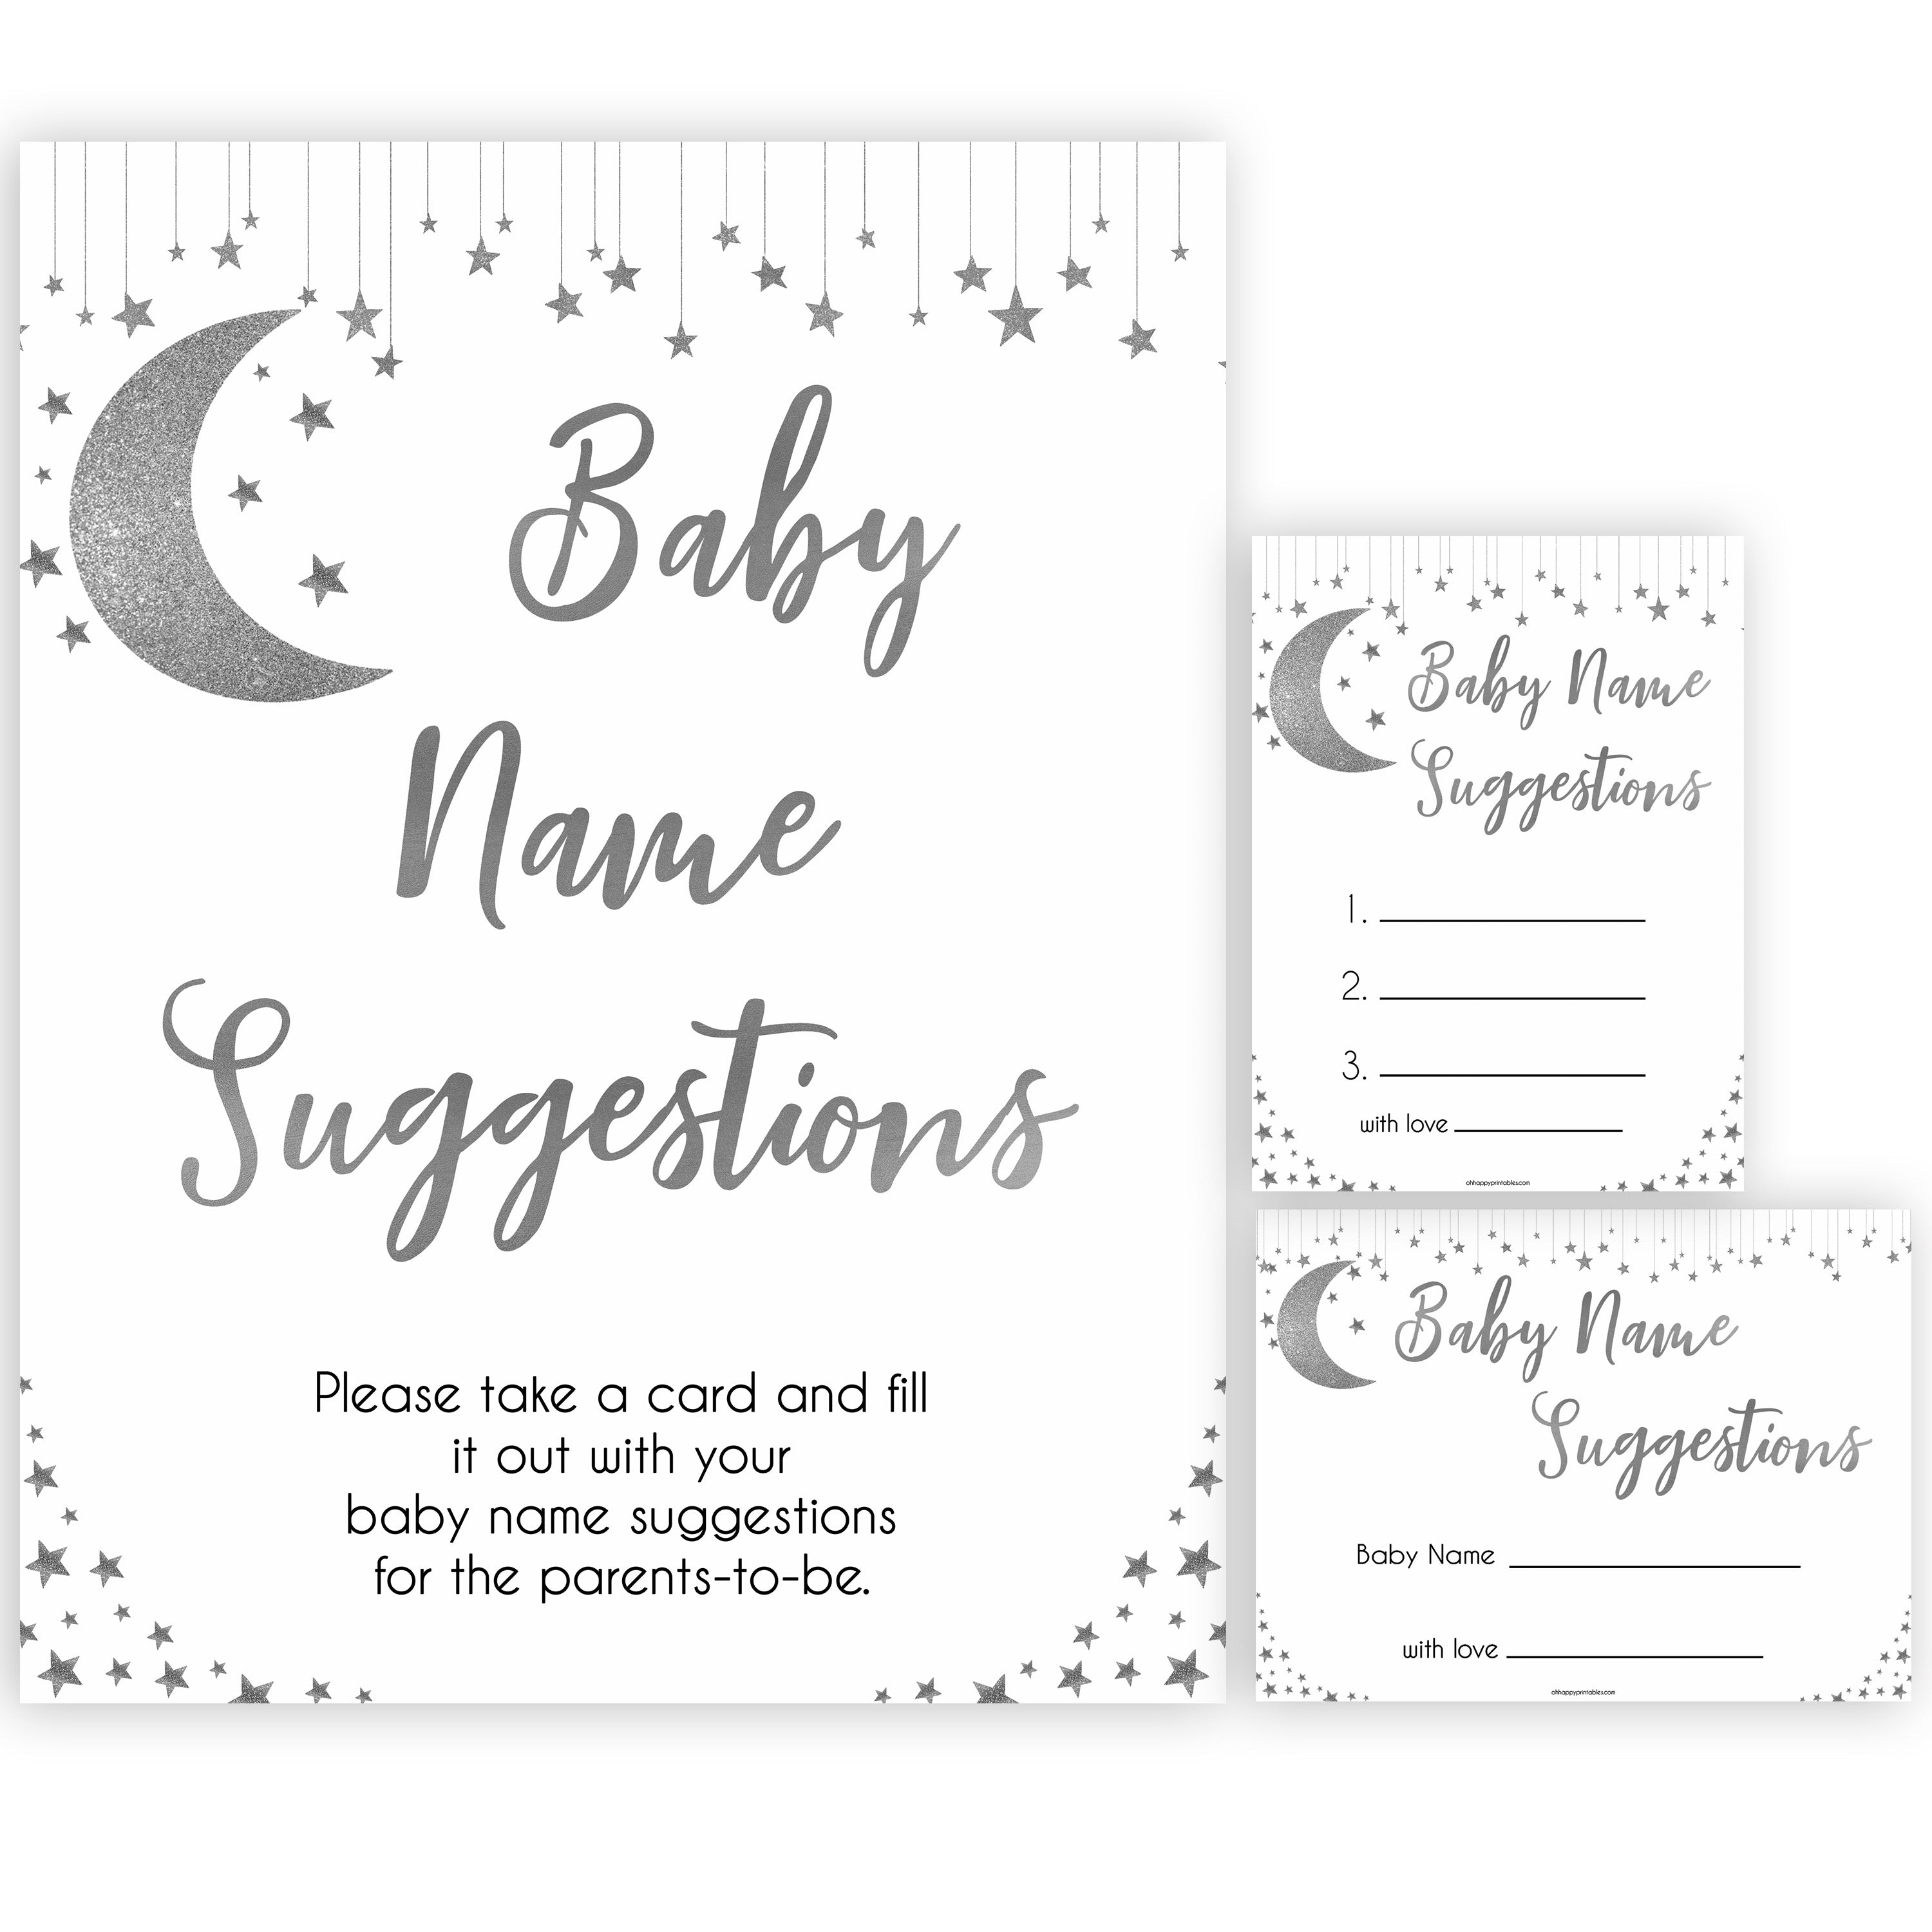 Silver little star, baby name suggestions baby games, baby shower games, printable baby games, fun baby games, twinkle little star games, baby games, fun baby shower ideas, baby shower ideas